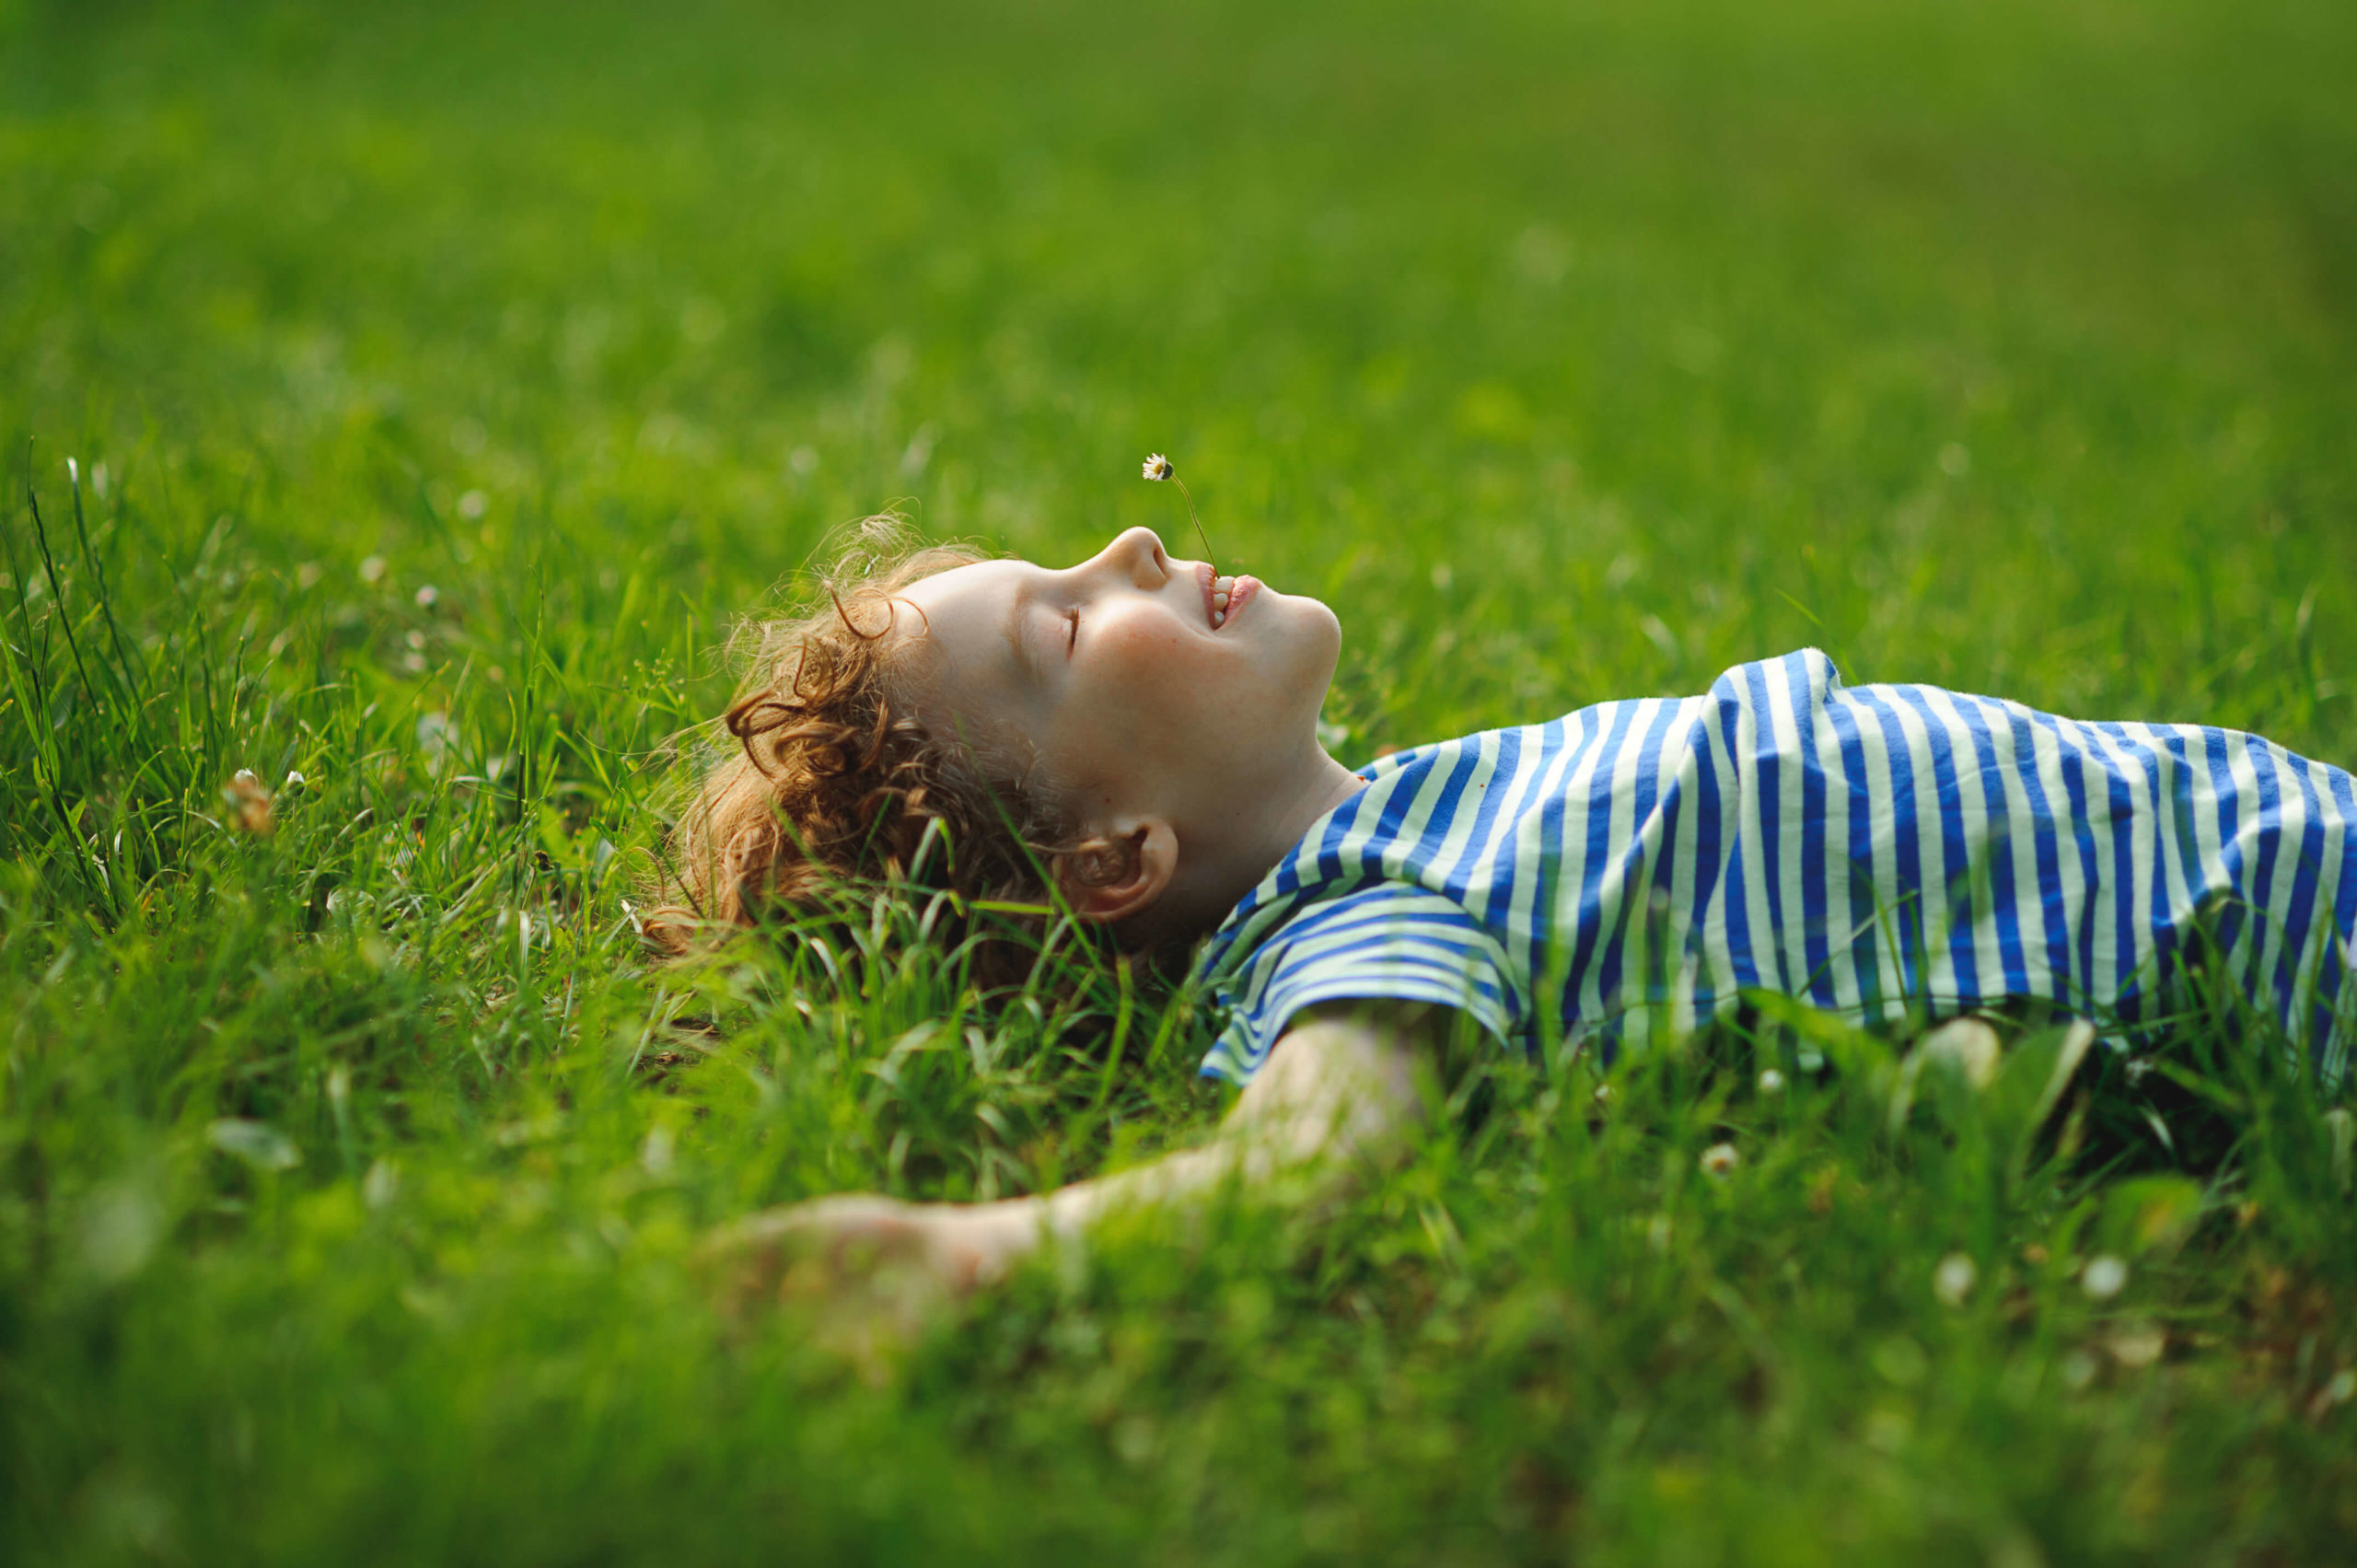 Progressive Muscle Relaxation for Kids: How to, Script, Techniques